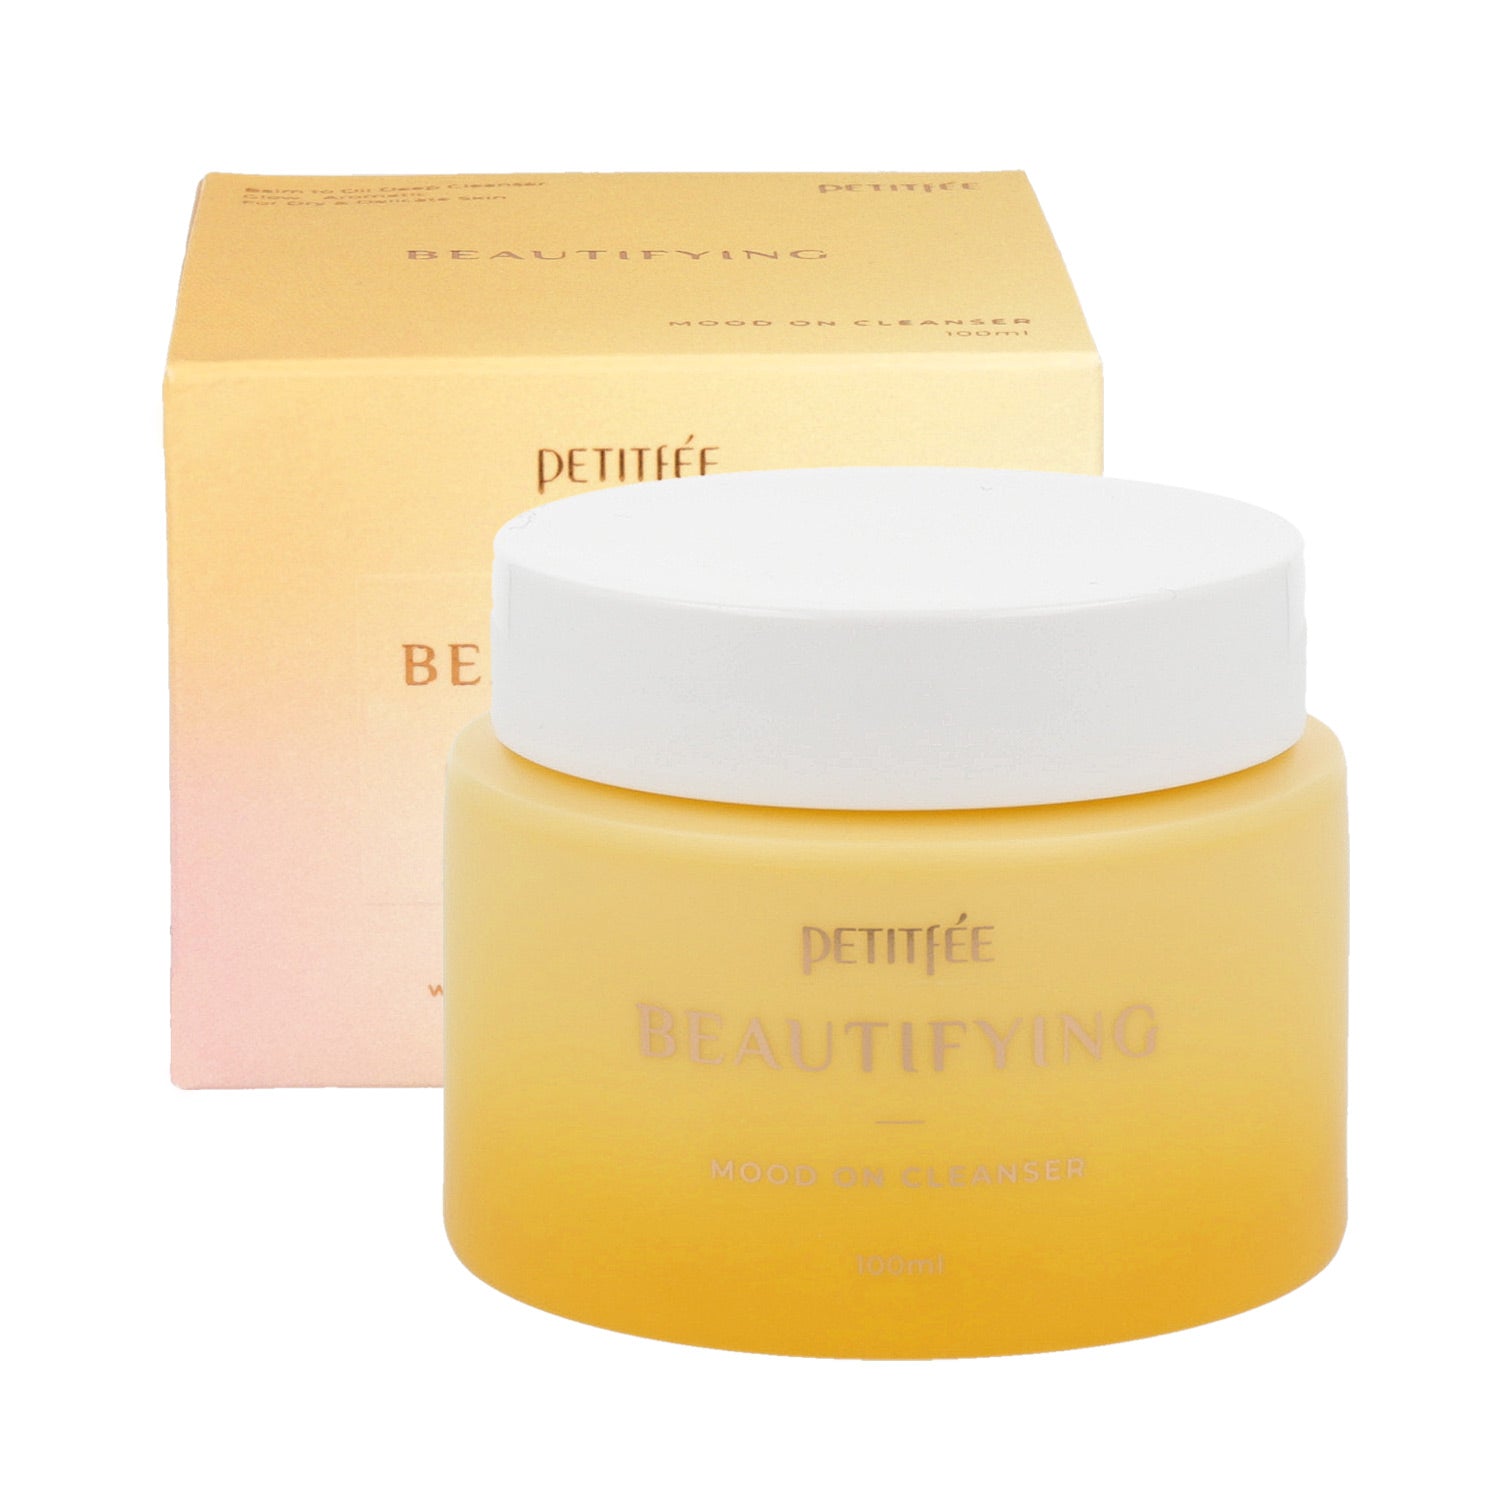 PETITFEE Beautifying Mood on Cleanser 100ml